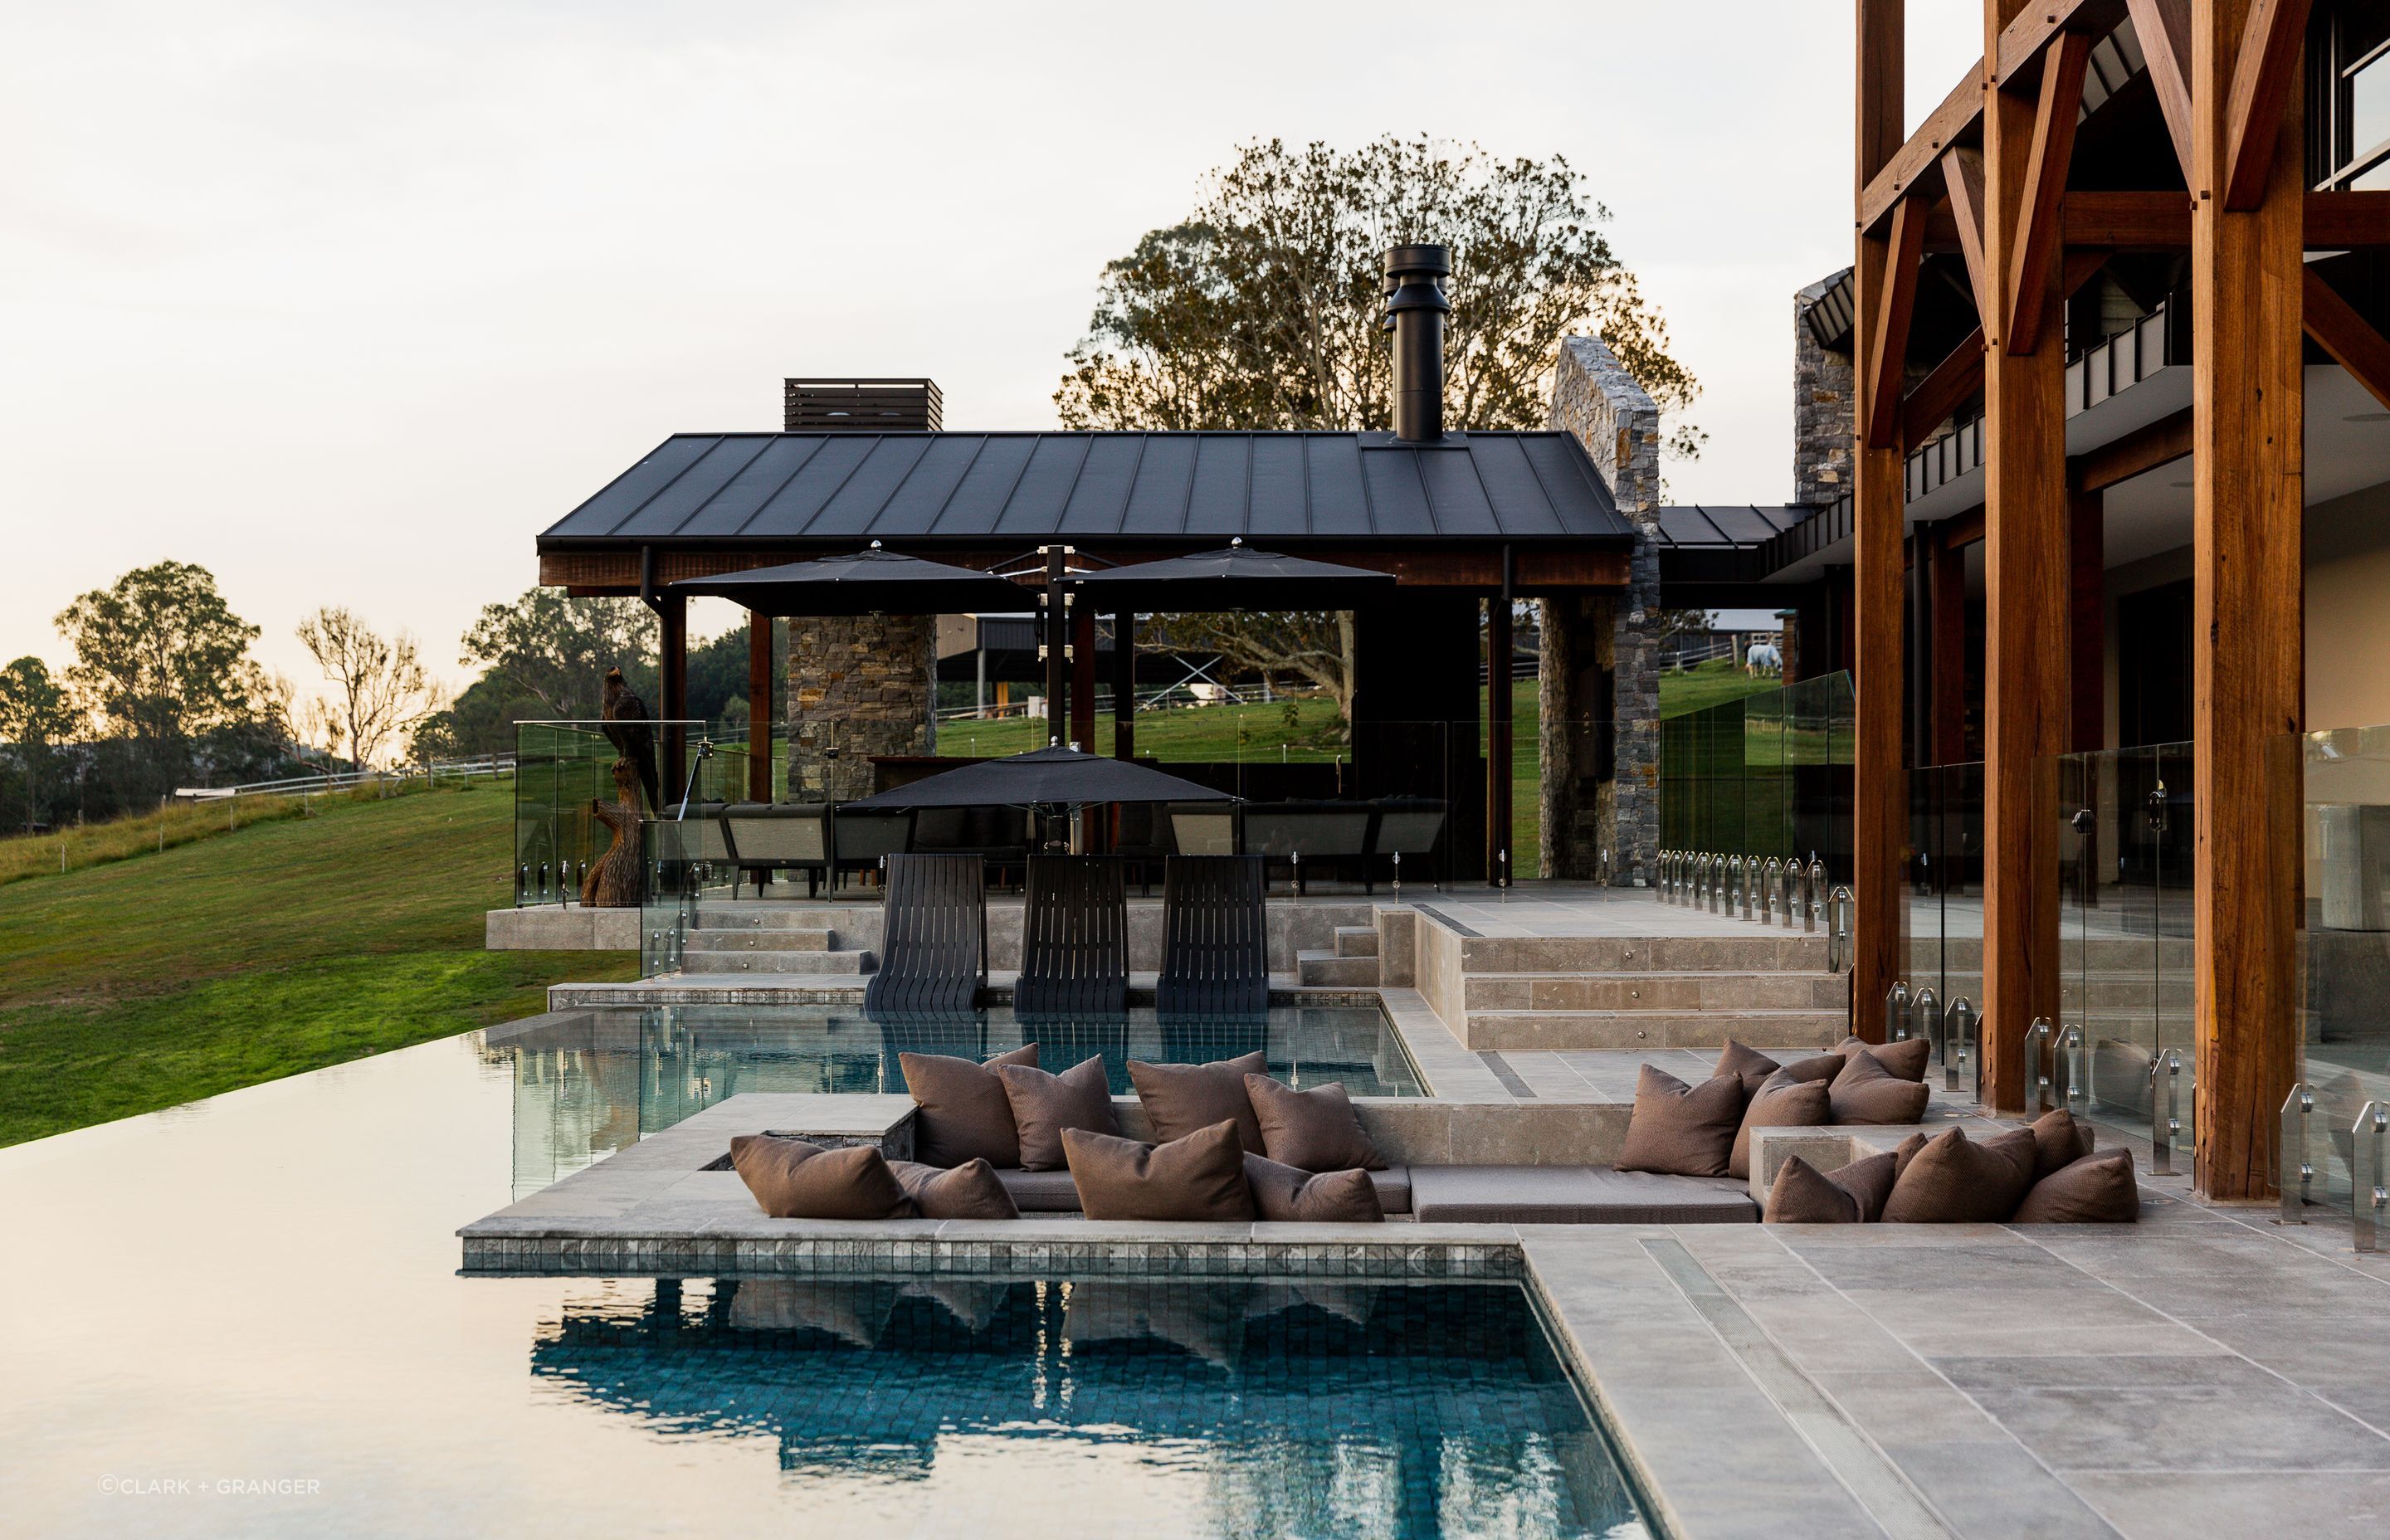 The perfect outdoor space for relaxing and entertaining guests. Photographer: Sabine Bannard.